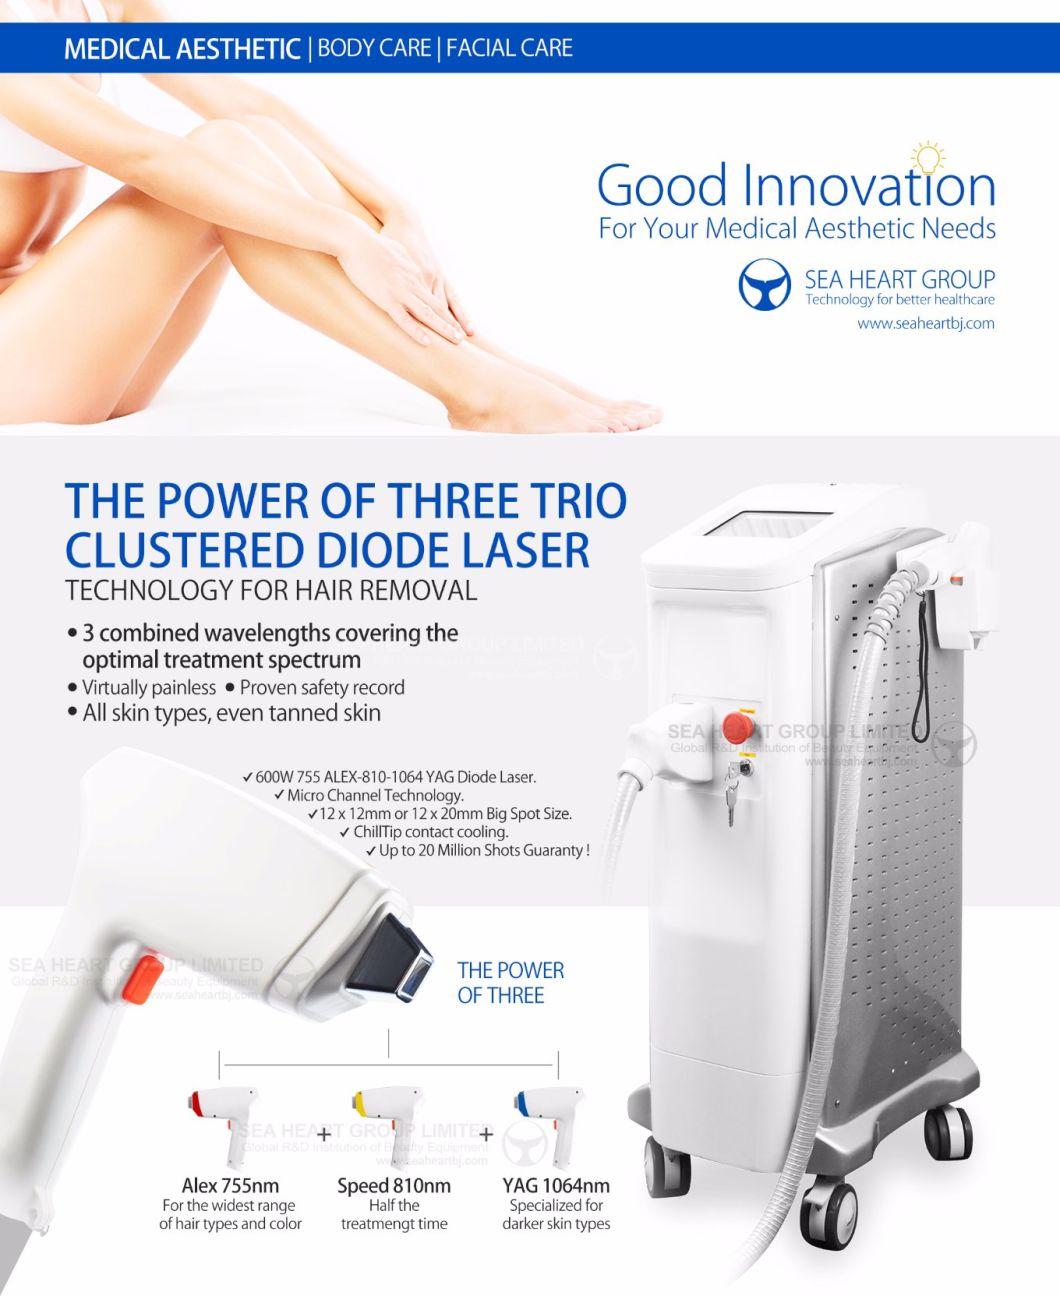 Hot Sale Diode Laser Vd820 600W Hair Removal Diode Laser Machine